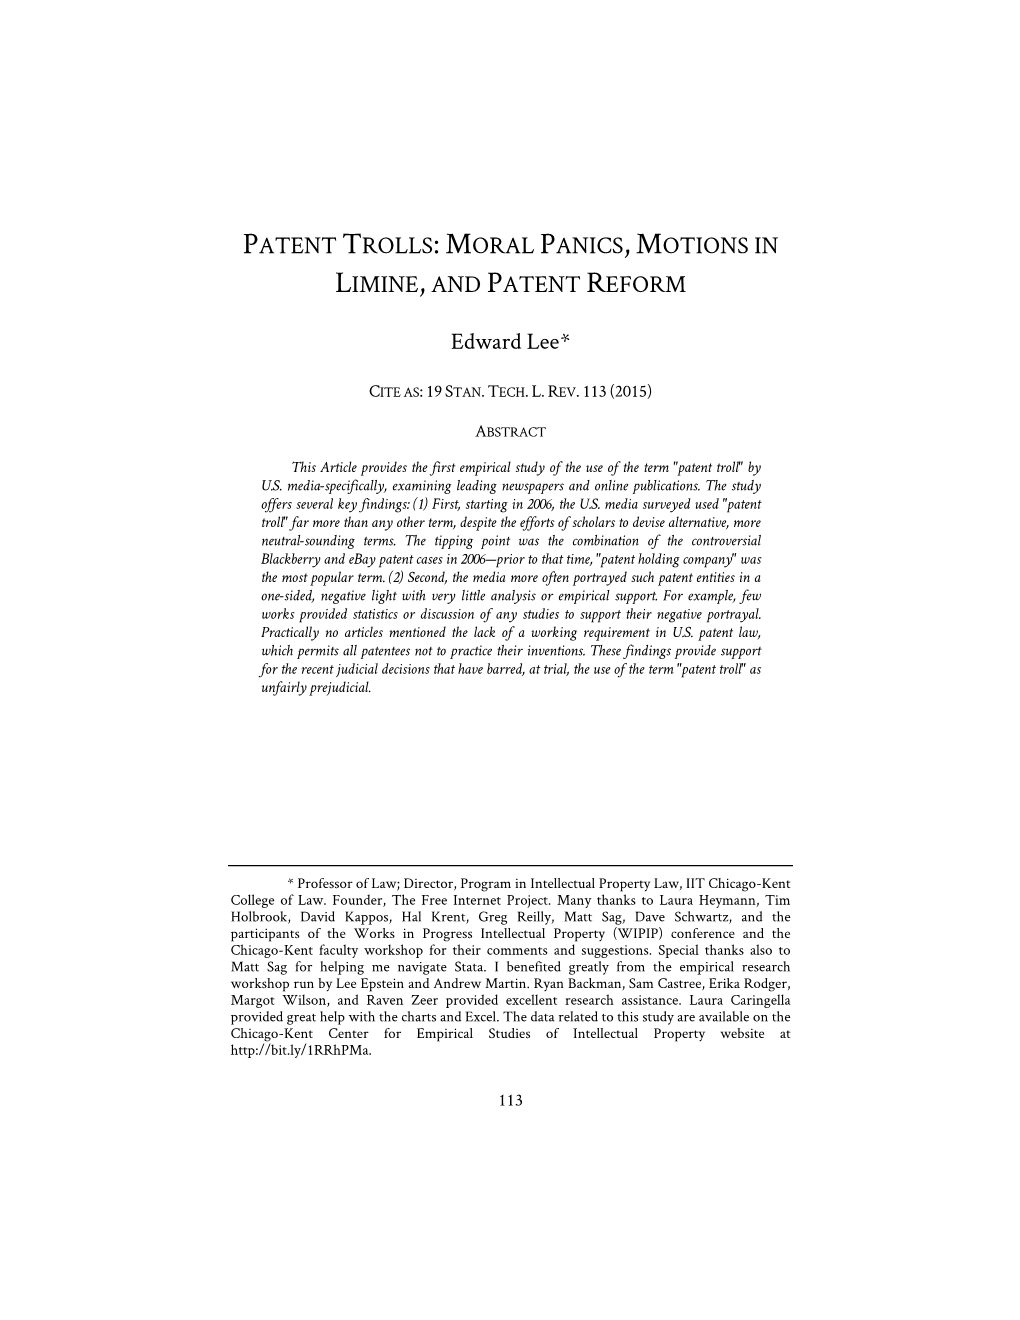 Patent Trolls: Moral Panics, Motions in Limine, and Patent Reform